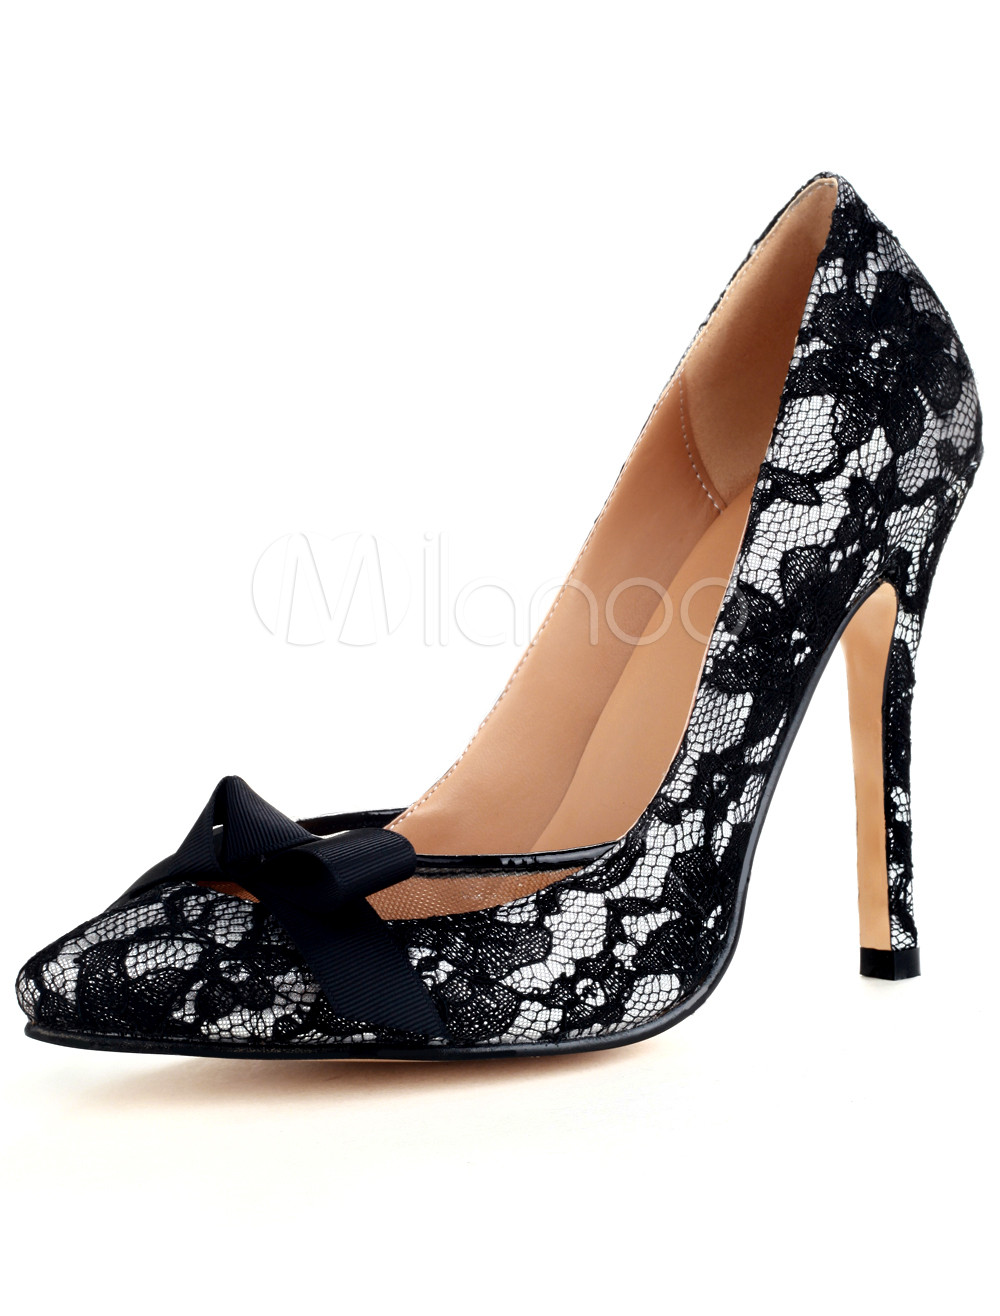 Black Lace Pointed Toe Mesh High Heels 8993